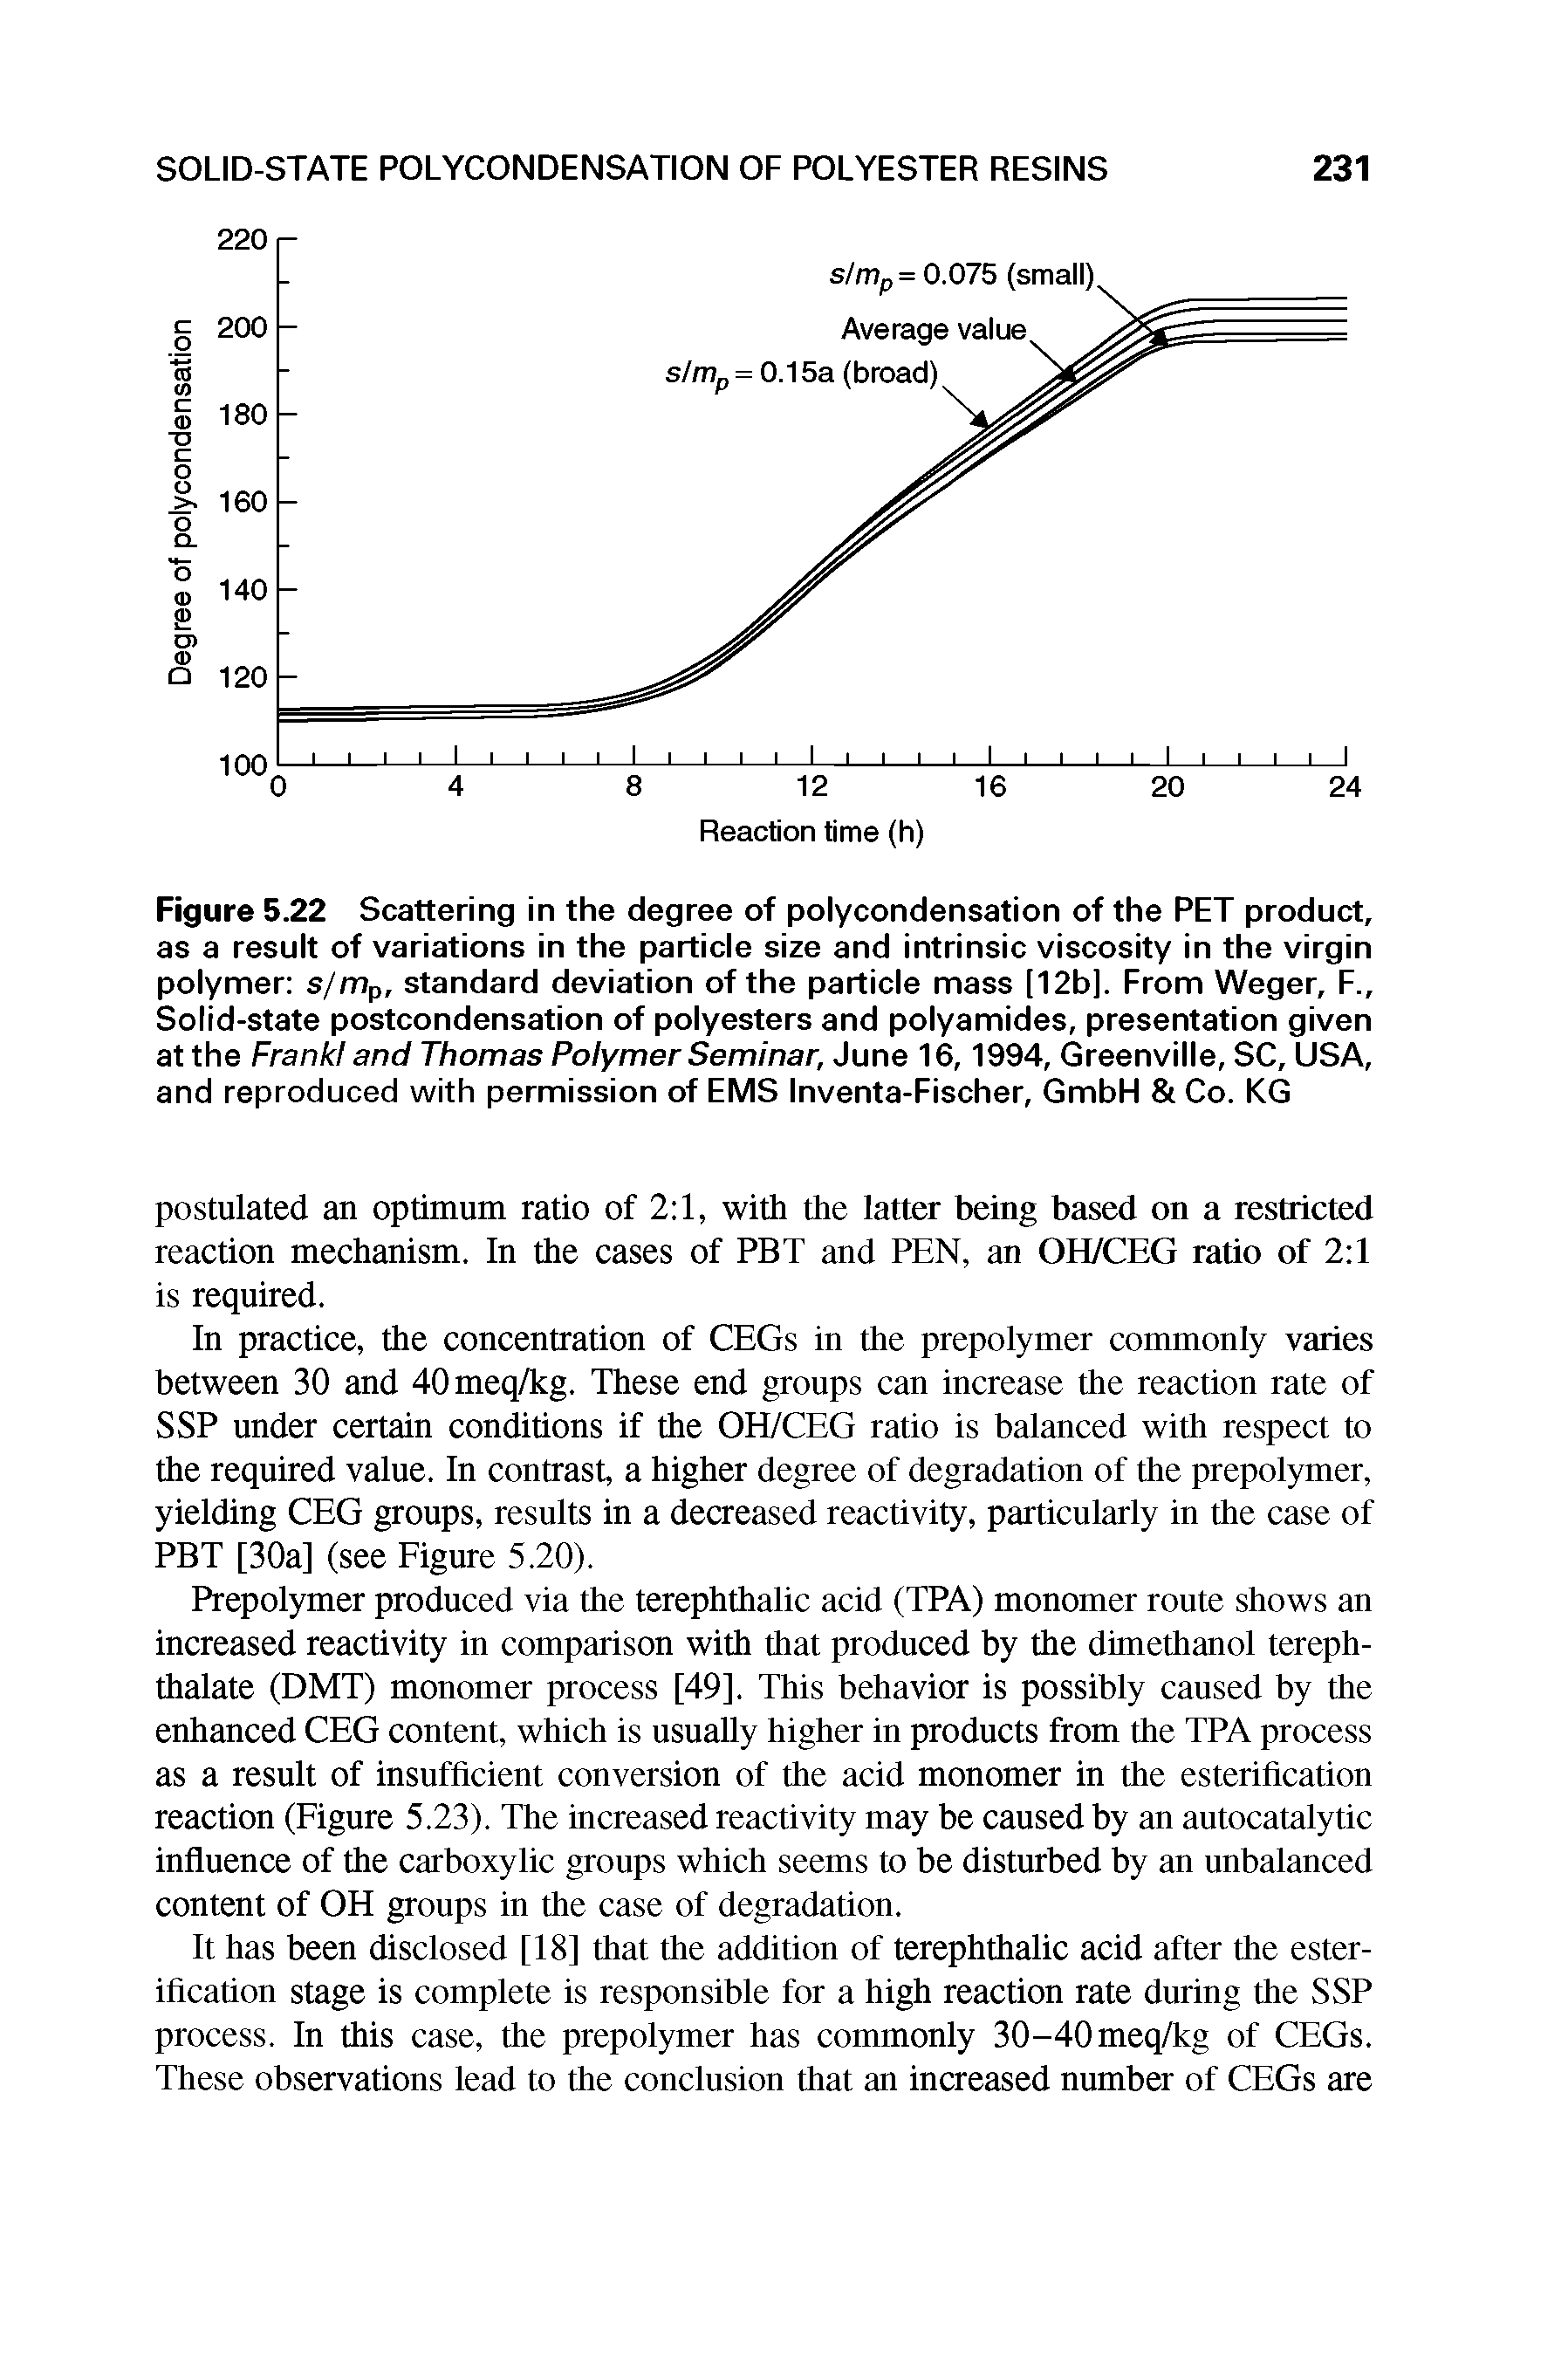 Figure 5.22 Scattering in the degree of polycondensation of the PET product, as a result of variations in the particle size and intrinsic viscosity in the virgin polymer s/mp, standard deviation of the particle mass [12b]. From Weger, F., Solid-state postcondensation of polyesters and polyamides, presentation given at the FrankI and Thomas Polymer Seminar, June 16,1994, Greenville, SC, USA, and reproduced with permission of EMS Inventa-Fischer, GmbH Co. KG...